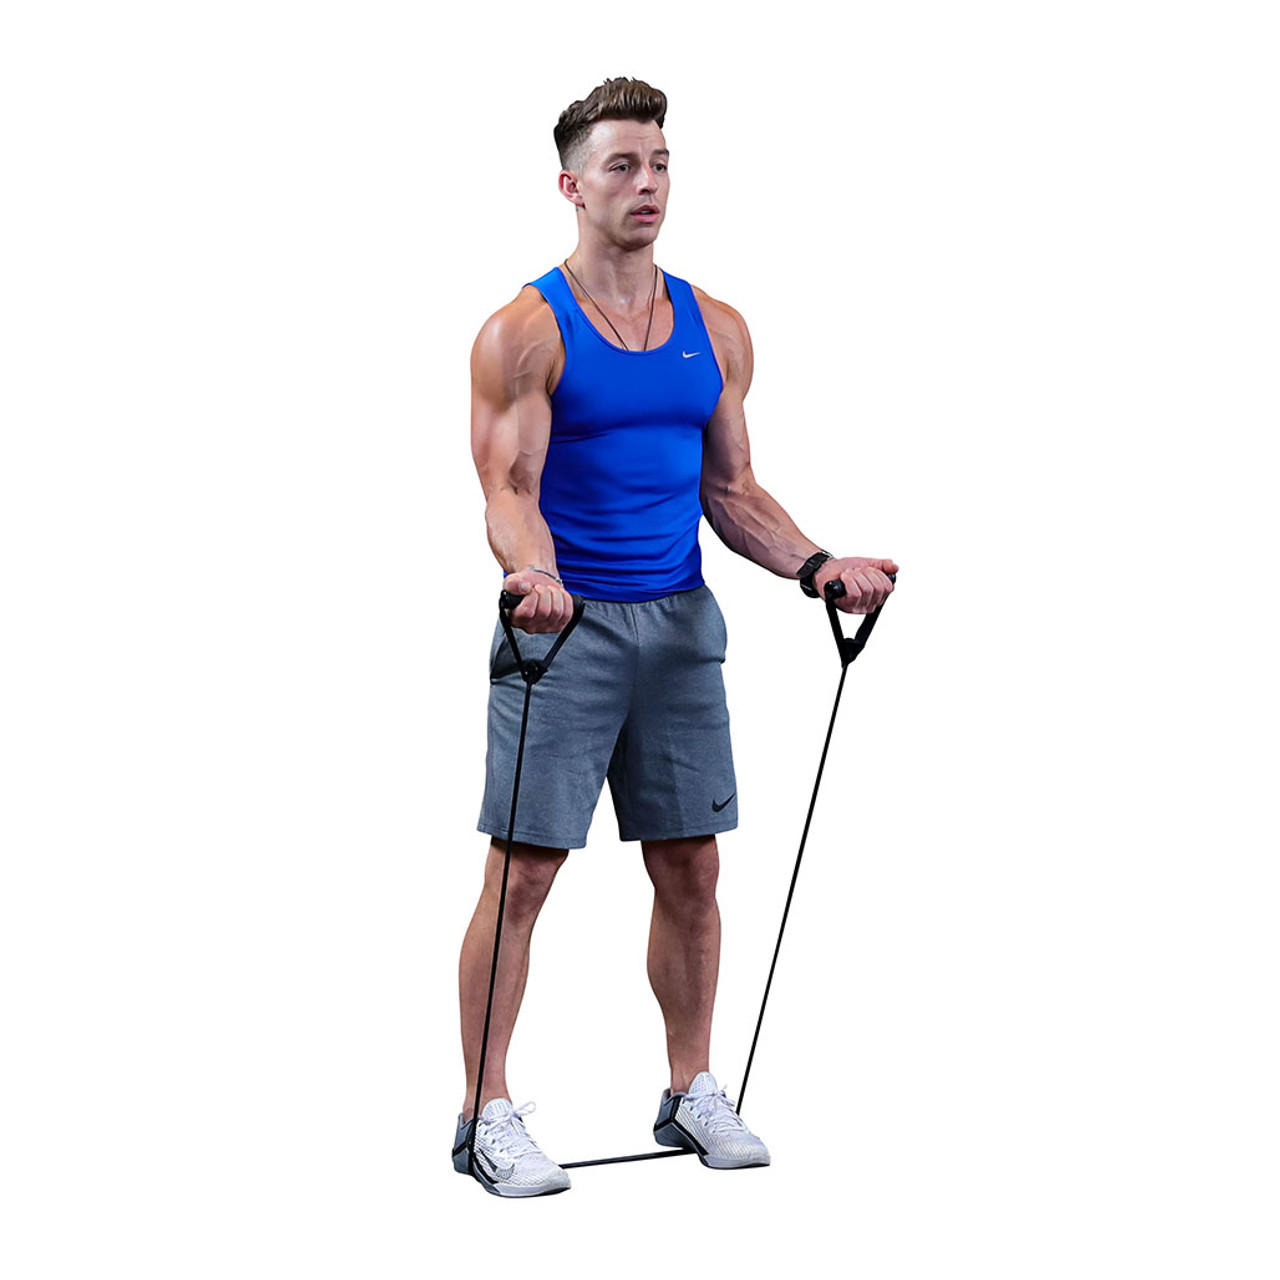 5 resistance band exercises for a total-body workout